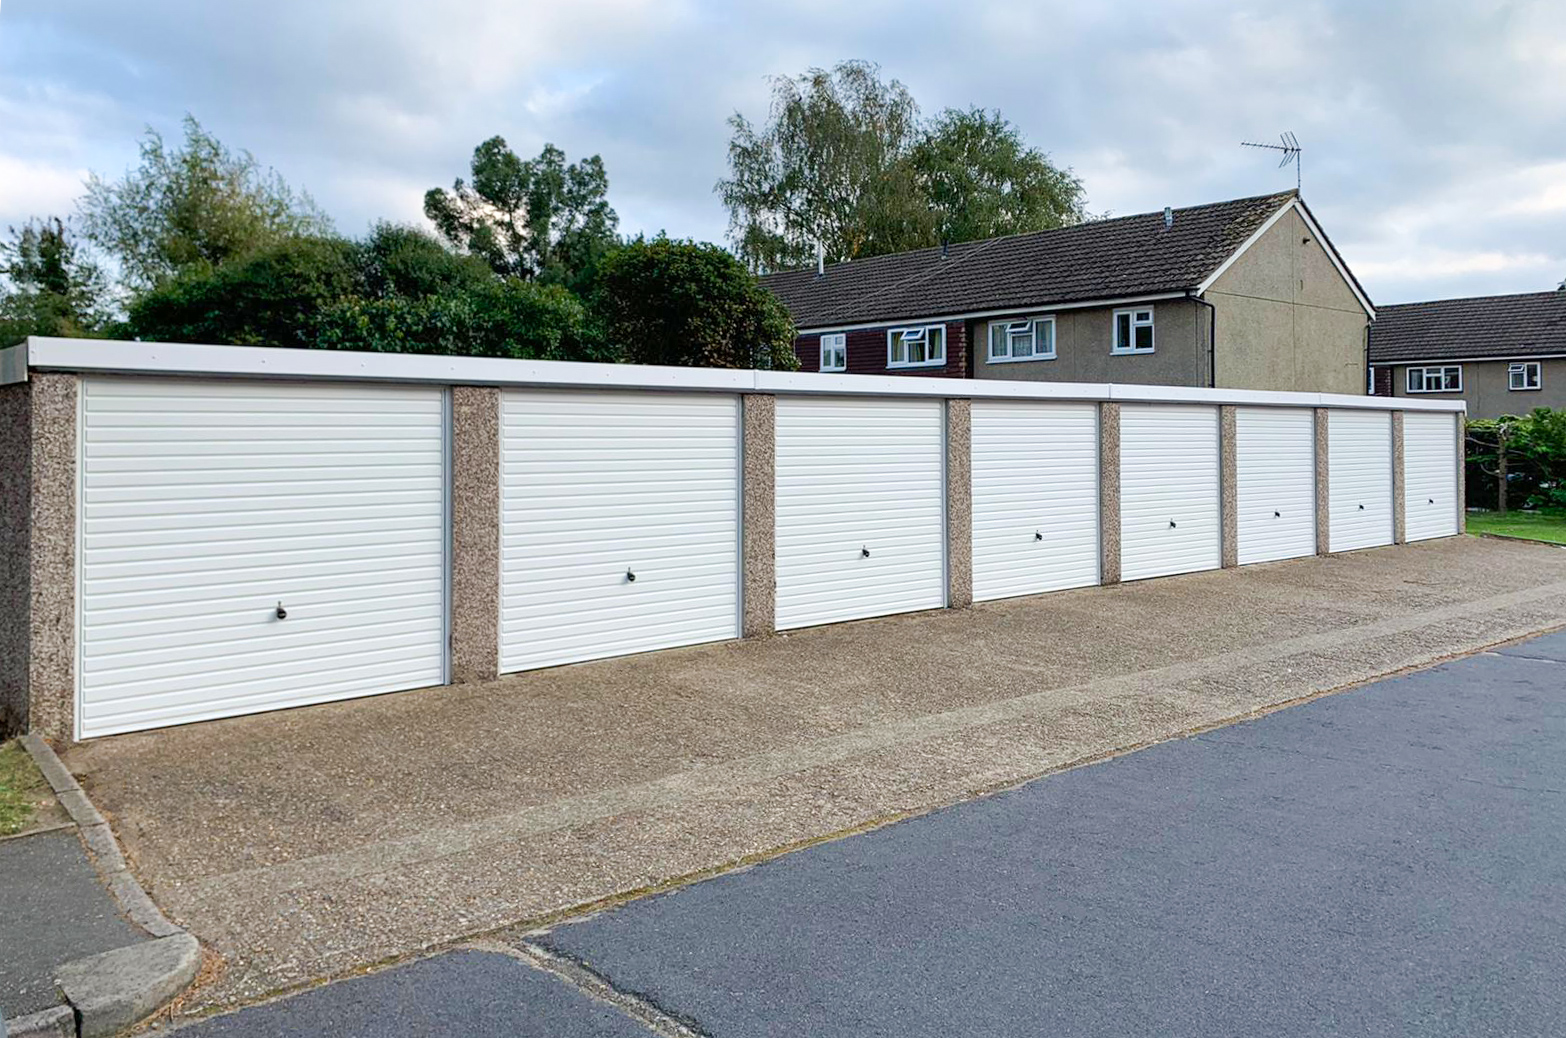 8x Hormann 2002 Steel Up & Over Horizontal Garage Doors Finished in White